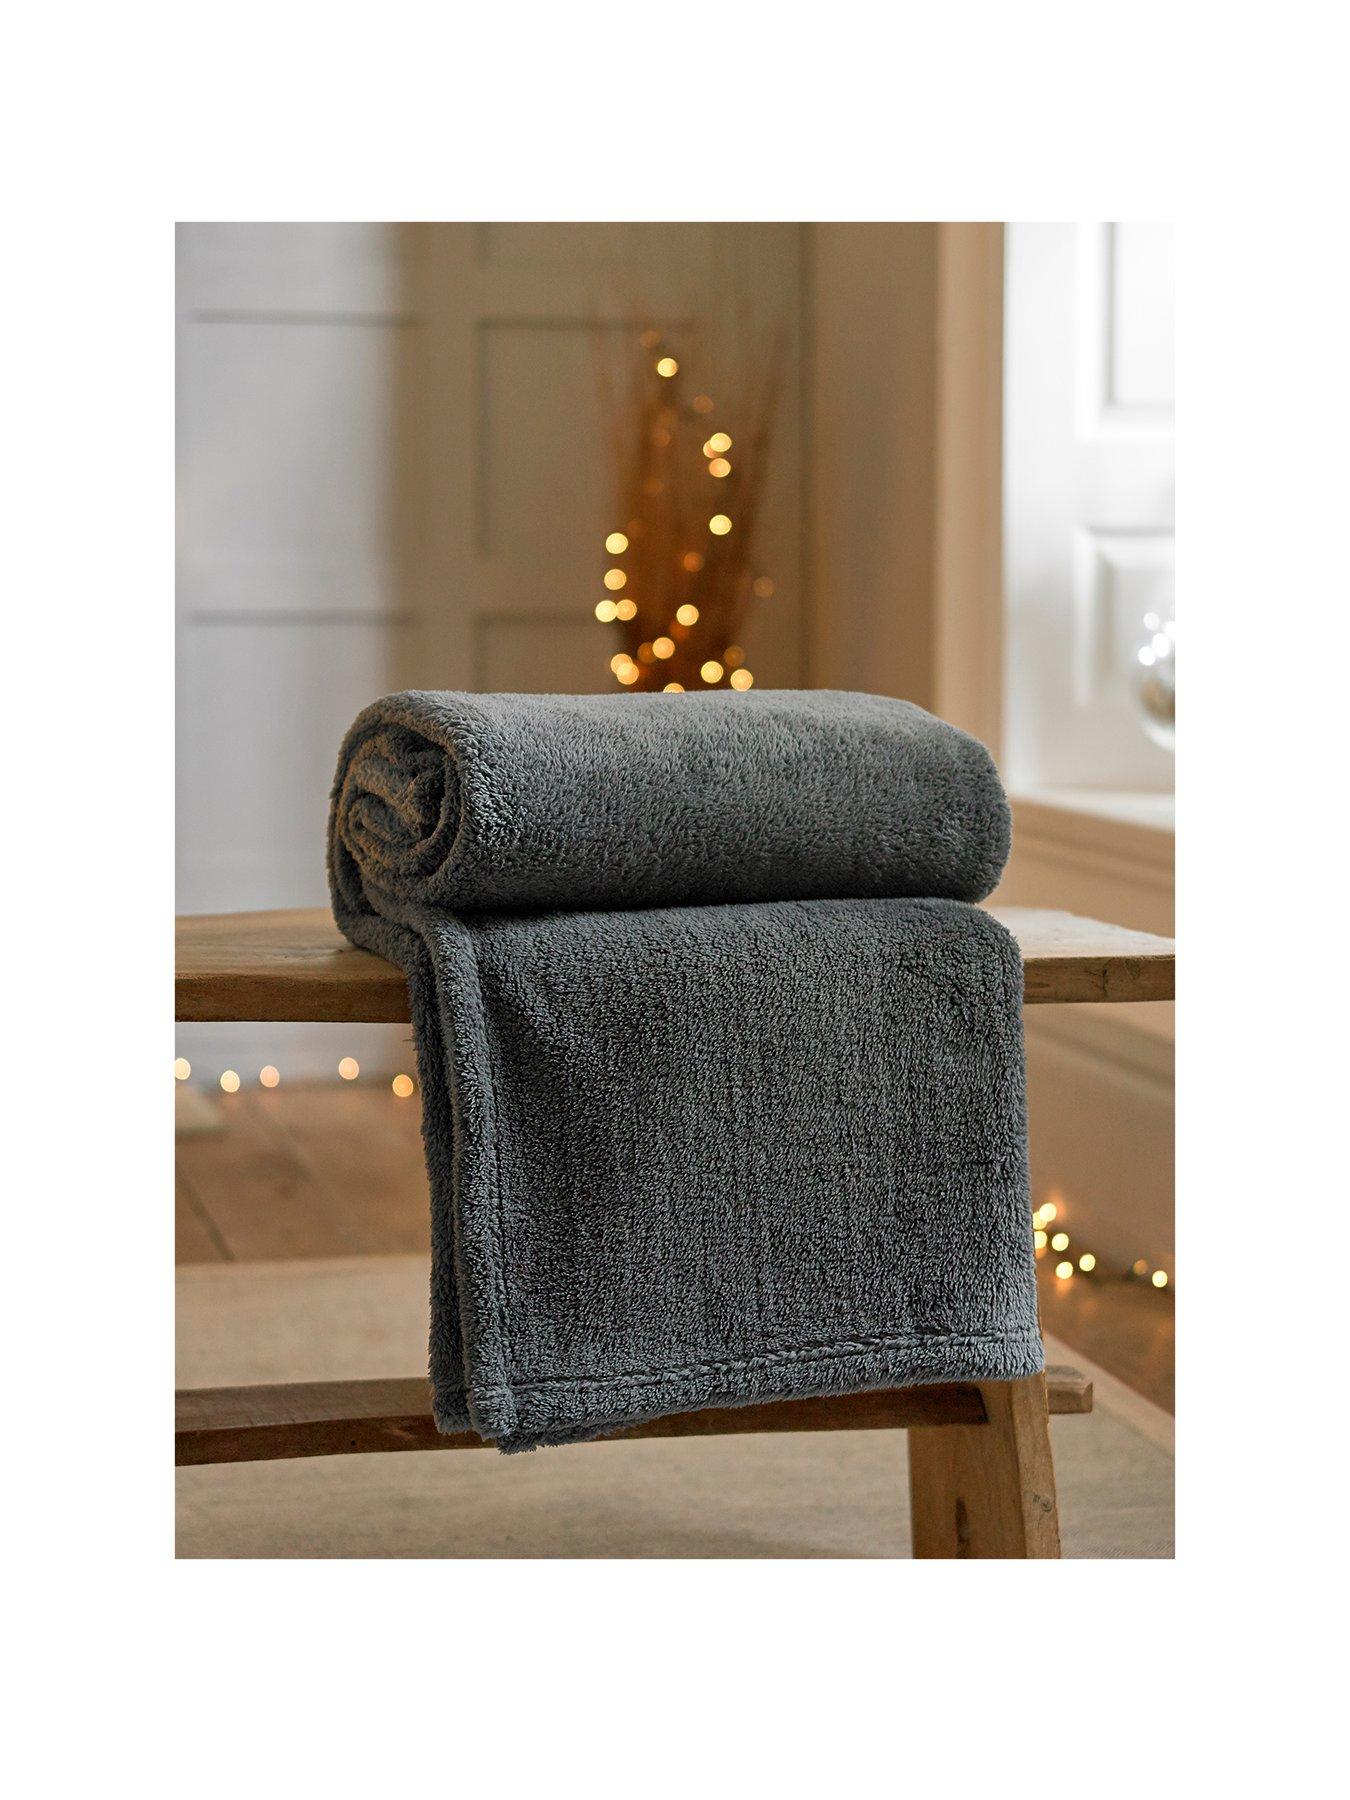 Flannel Fleece Soft Blankets All Season 40x60inch Warm Lightweight Luxury Microfiber Throws Black Life Tree HELLOWINK Throw Blankets for Couch Bed Sofa 